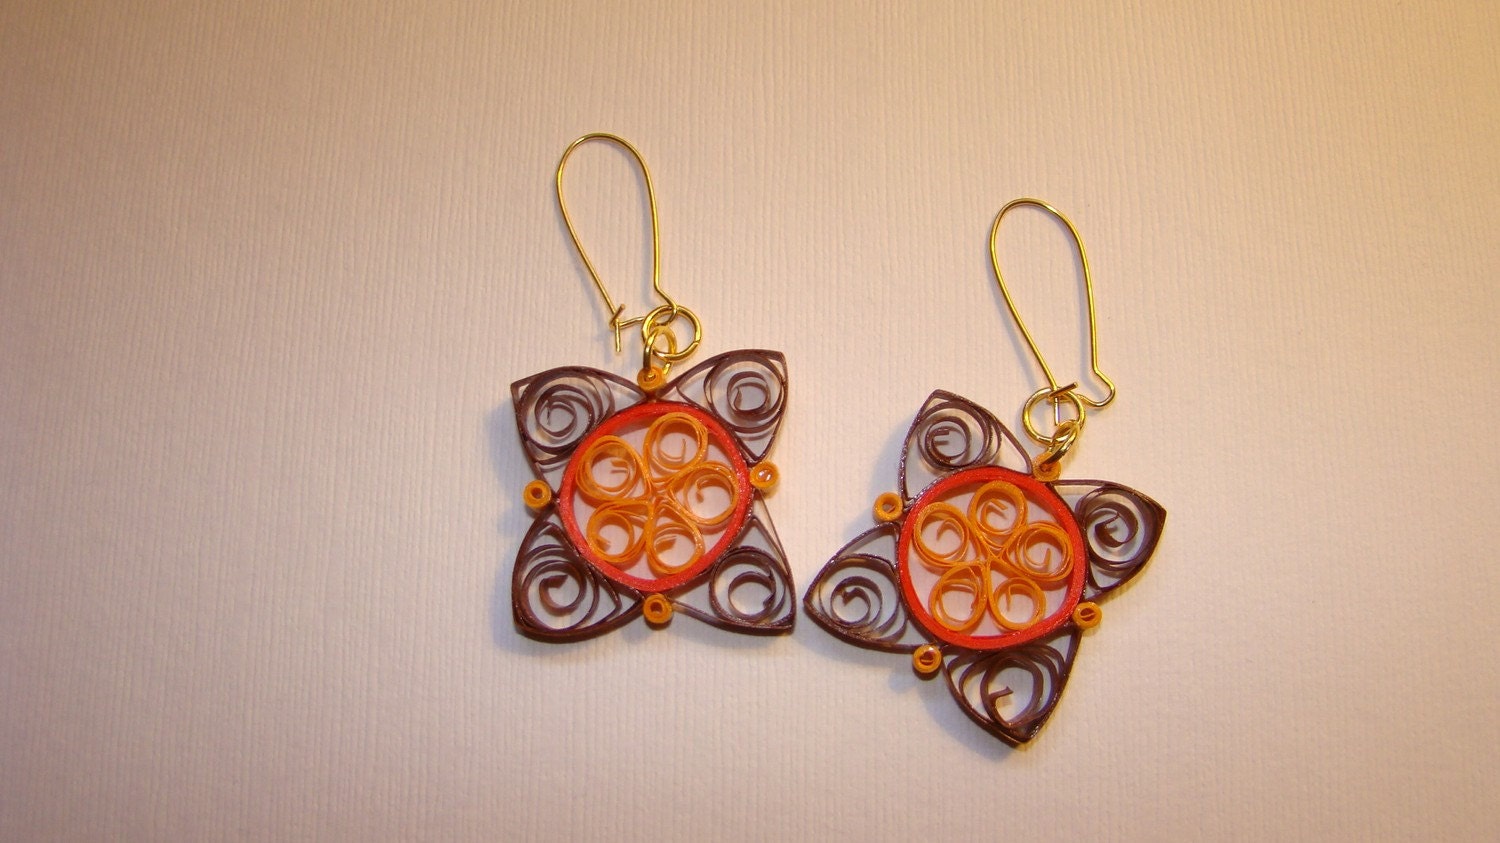 Adorable paper quilled earrings by Rocio Toscano. Filigree